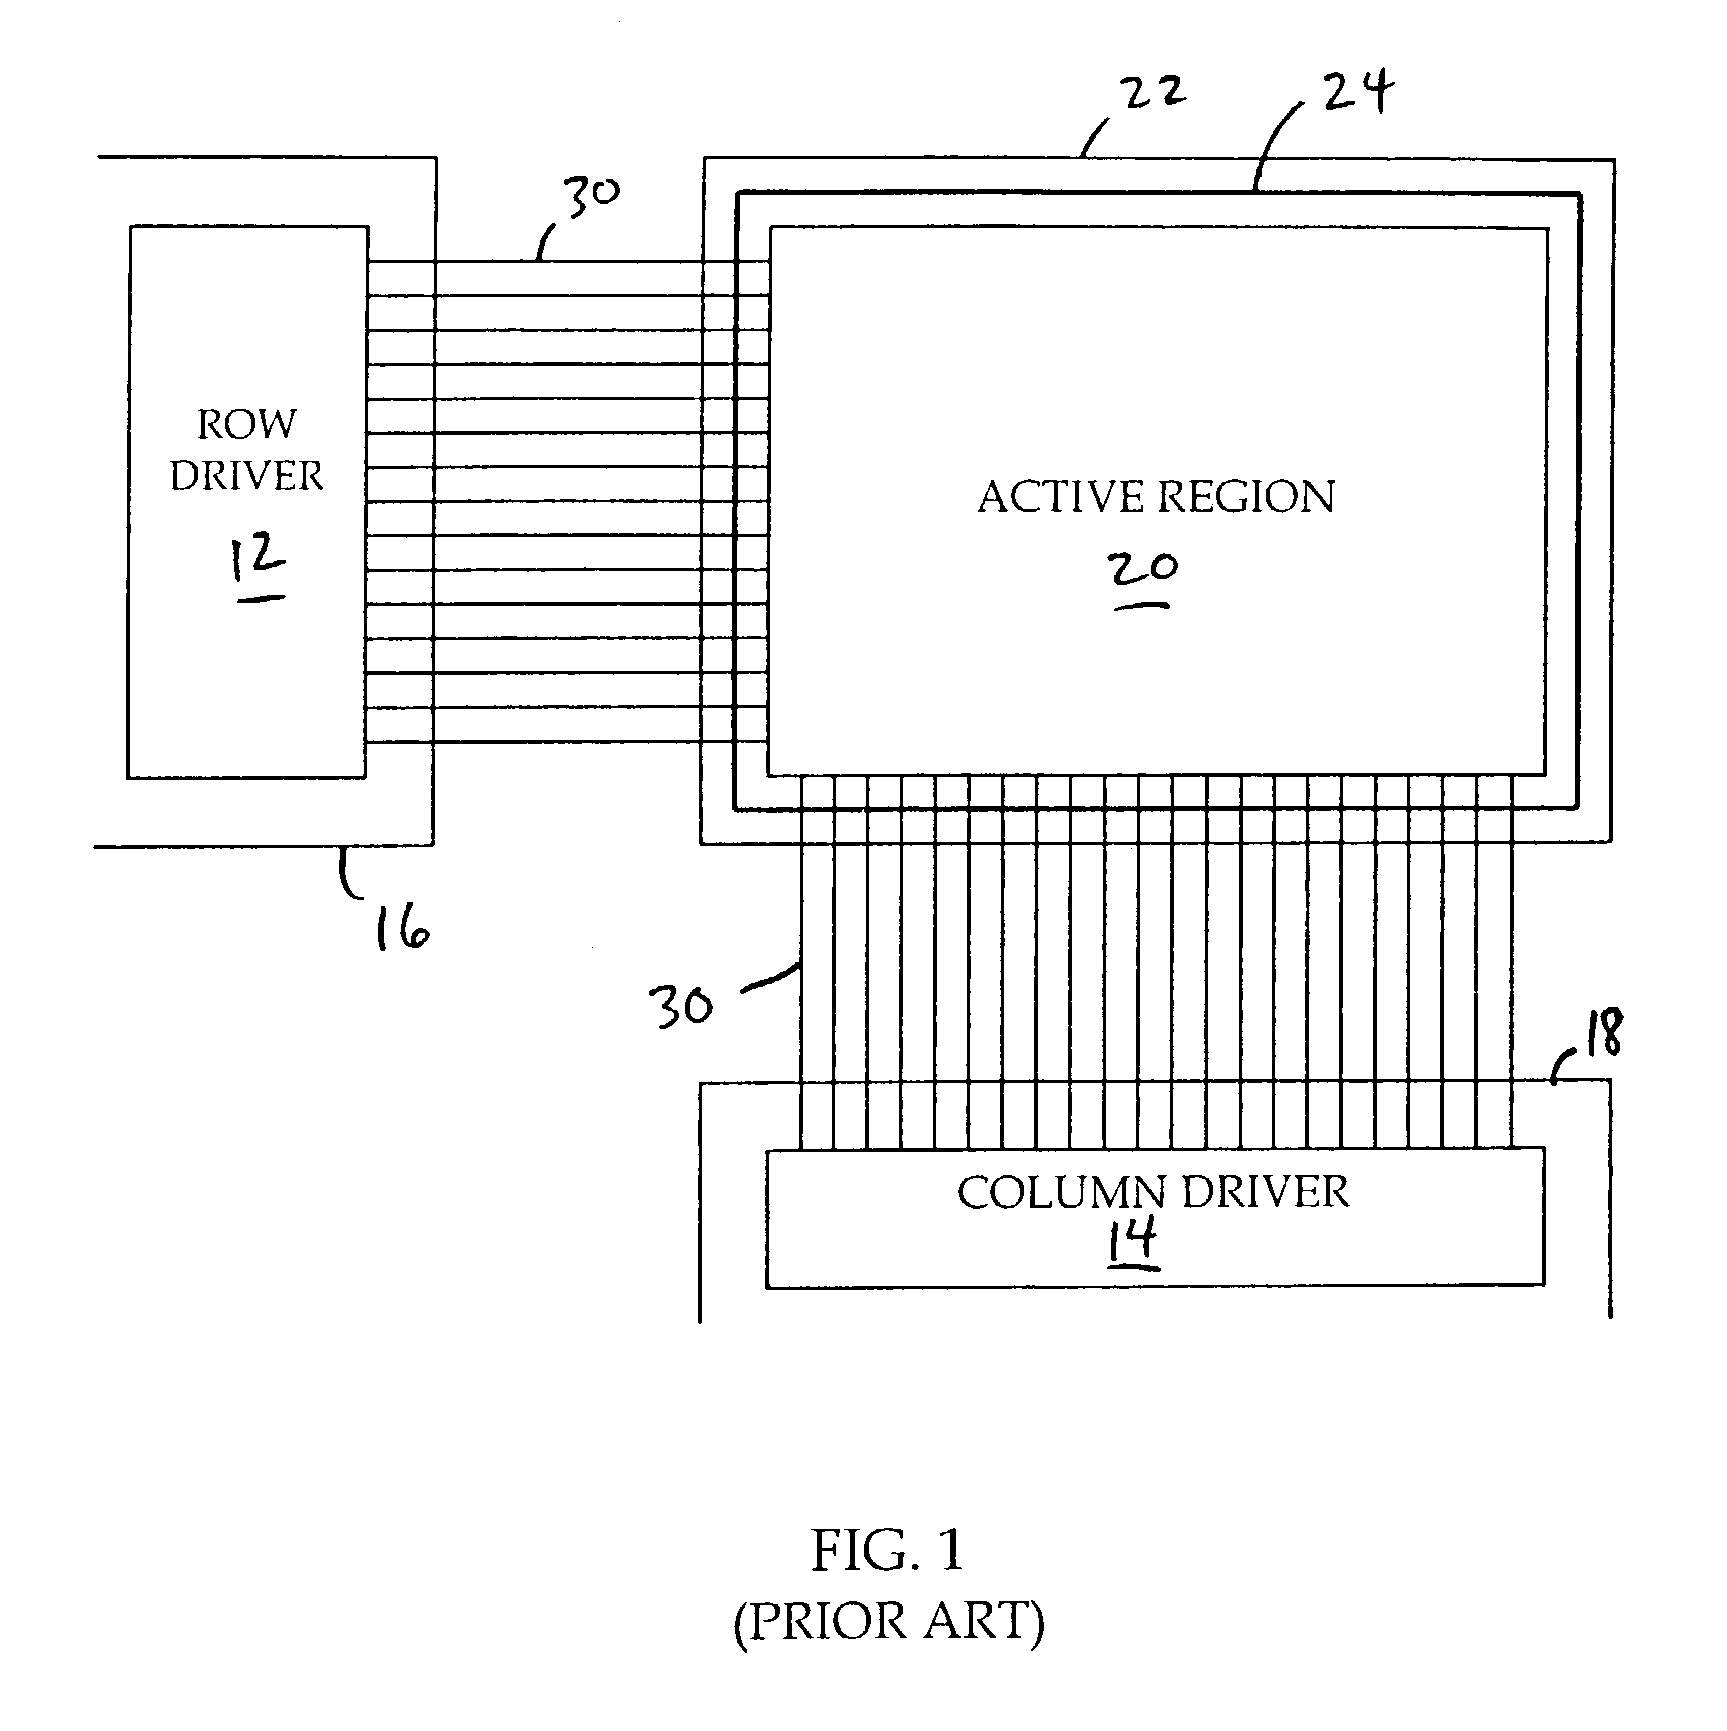 Image display device incorporating driver circuits on active substrate and other methods to reduce interconnects